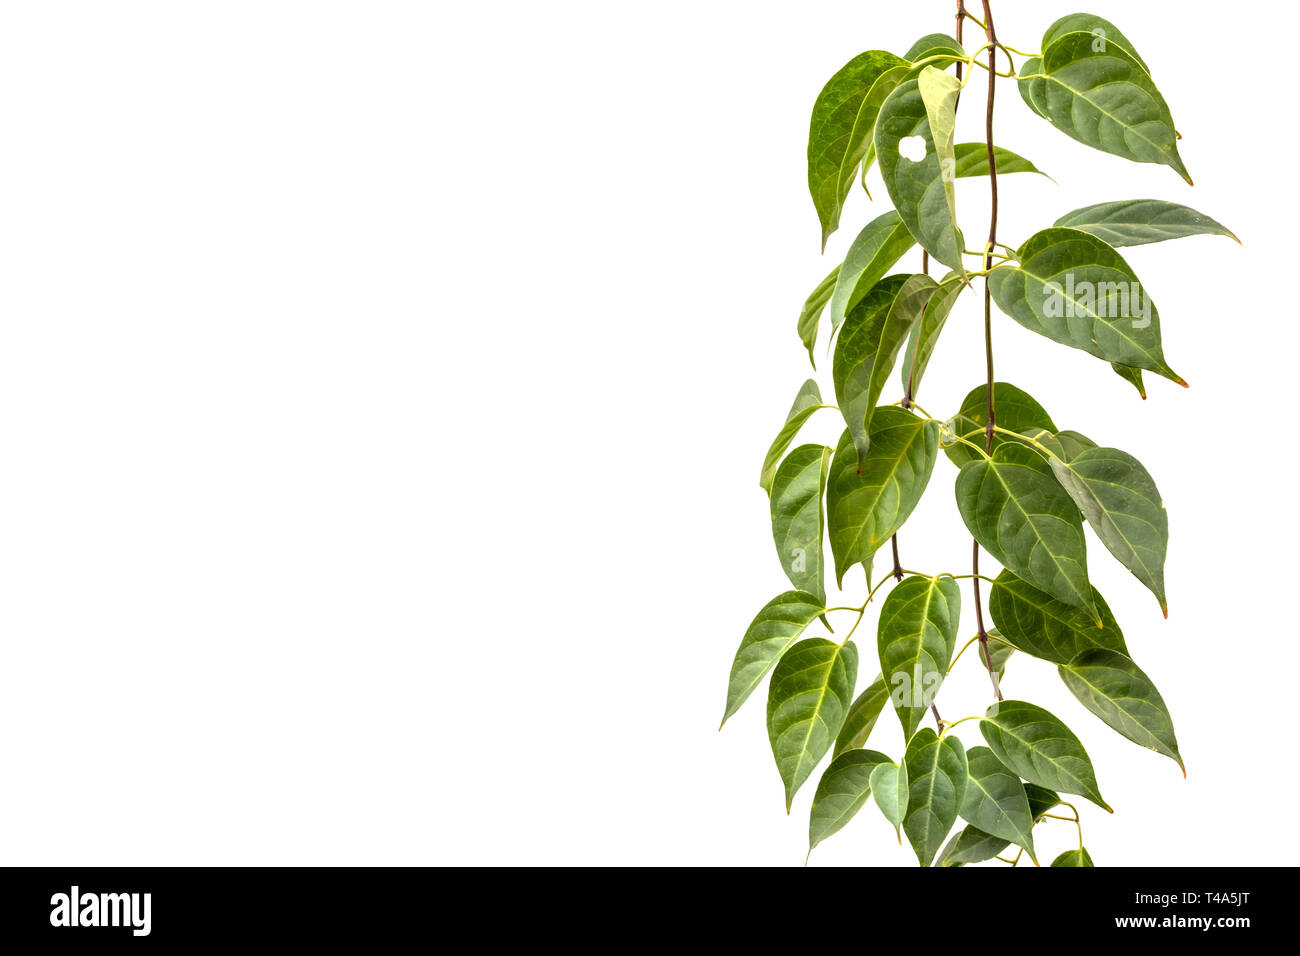 Bueatiful vine plant isolated on white background. Green climbing ivy copy space for text. Stock Photo